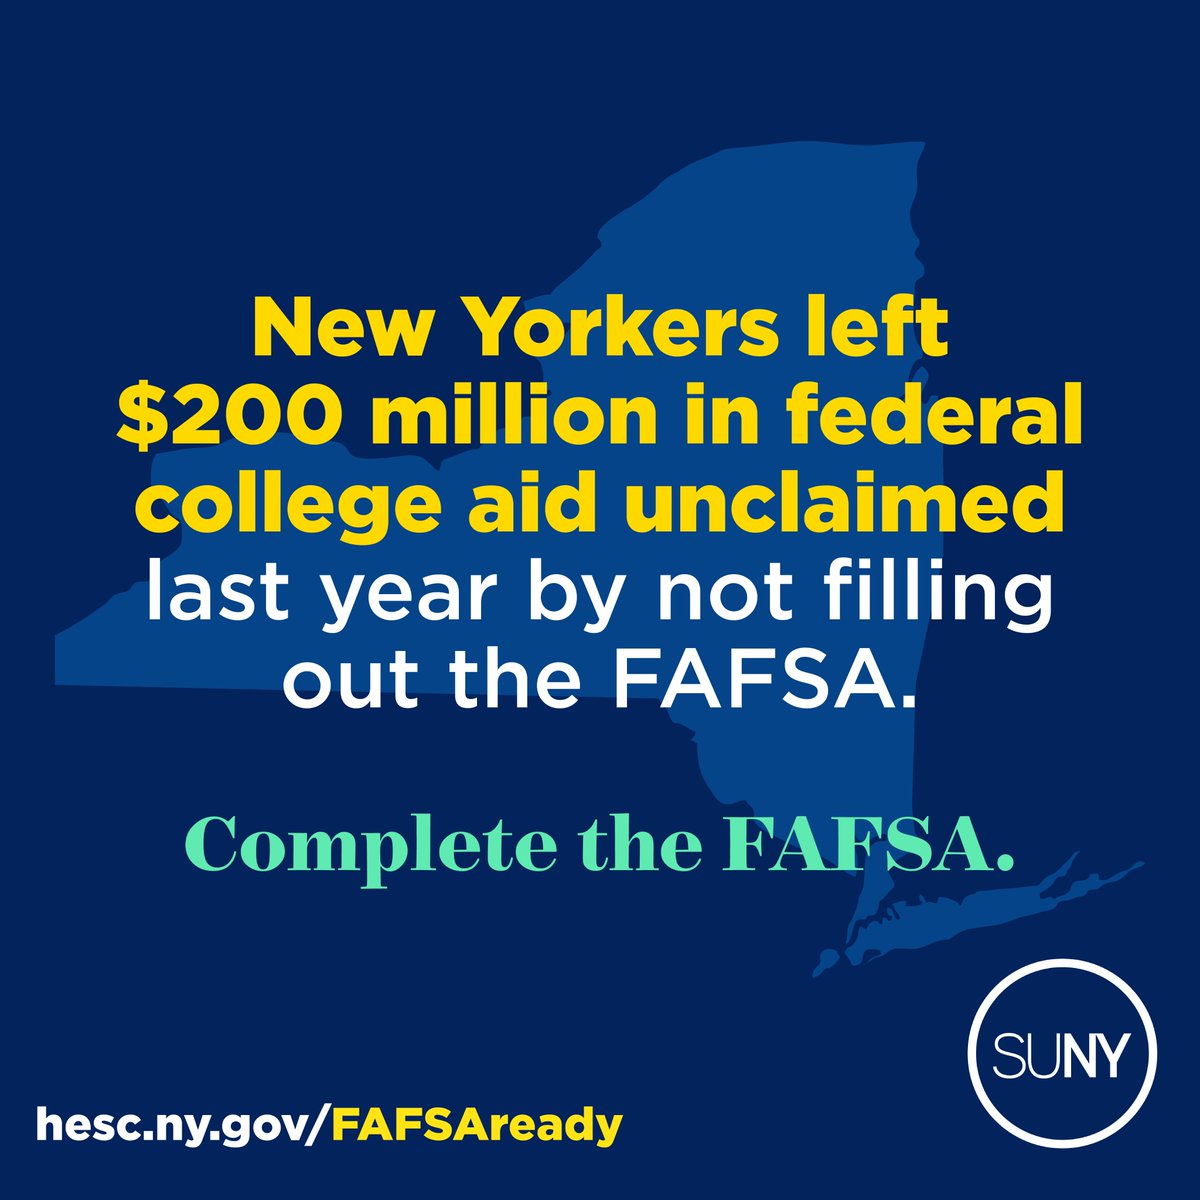 Every year, FAFSA helps New York students access millions of dollars to make college more affordable. The application is free, and it opens the door to scholarships and both federal and state aid. To apply, visit hesc.ny.gov/FAFSAready.